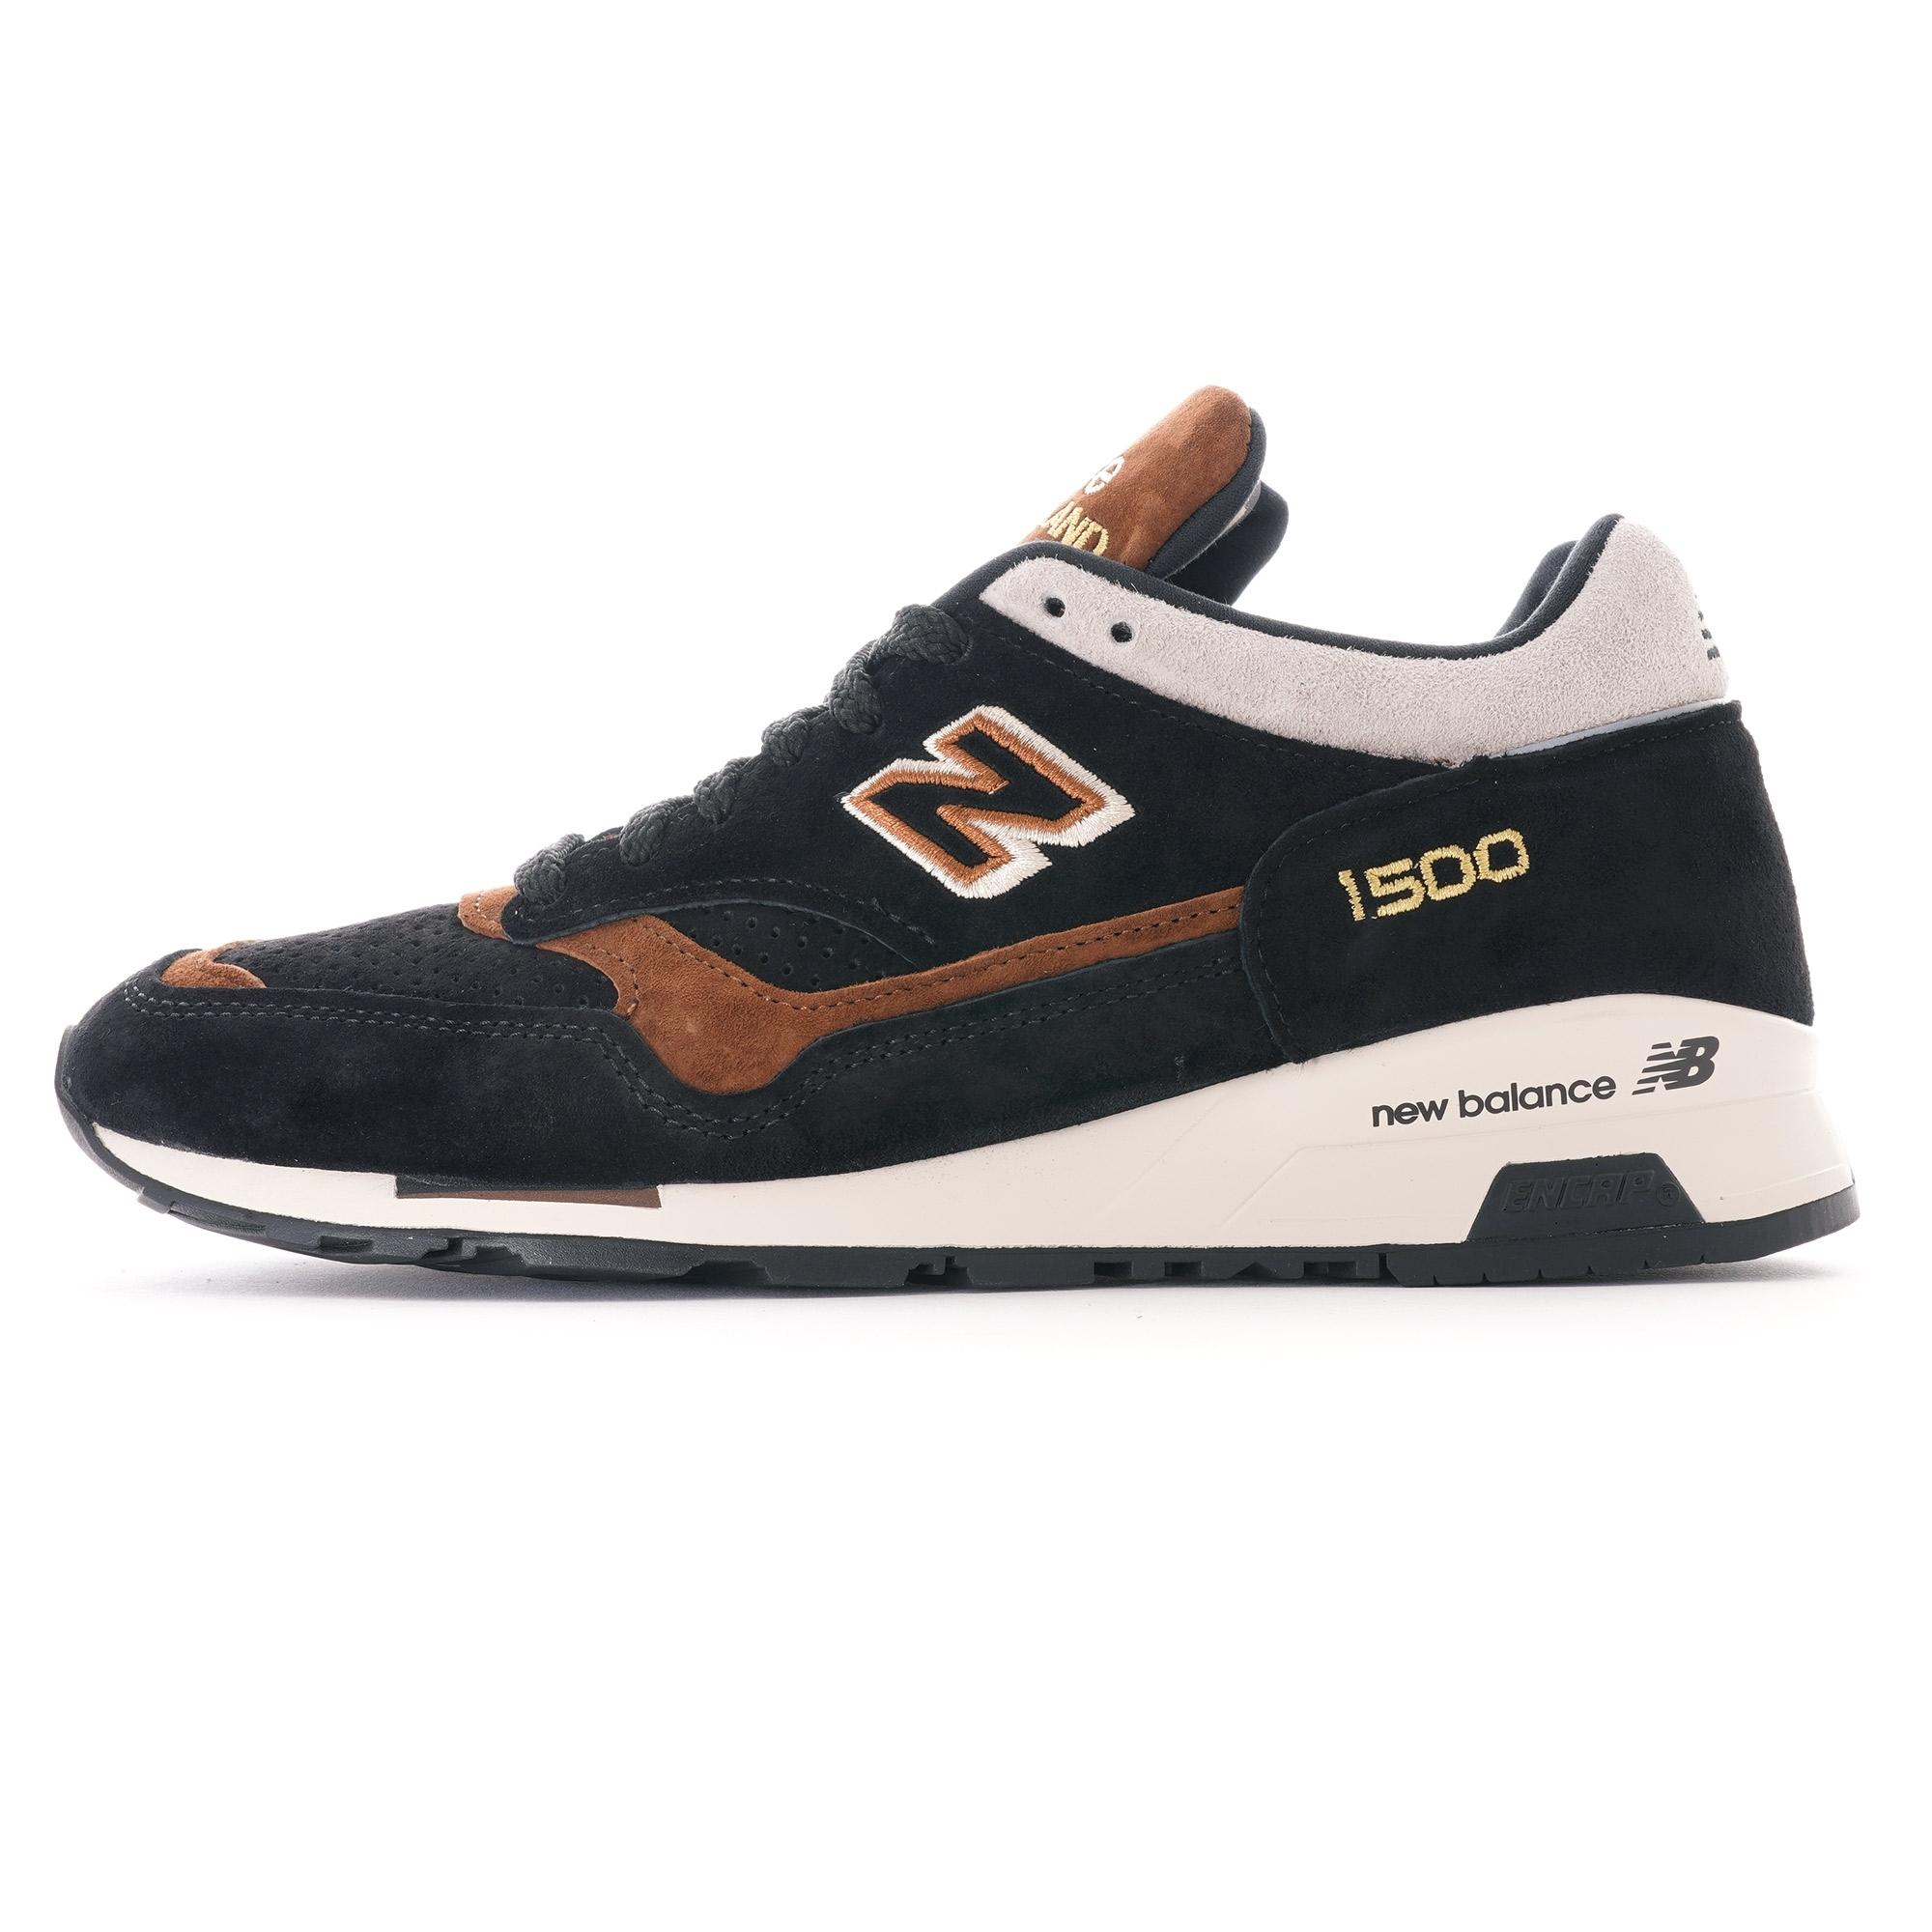 New Balance 1500 Year Of The Rat for Men - Lyst